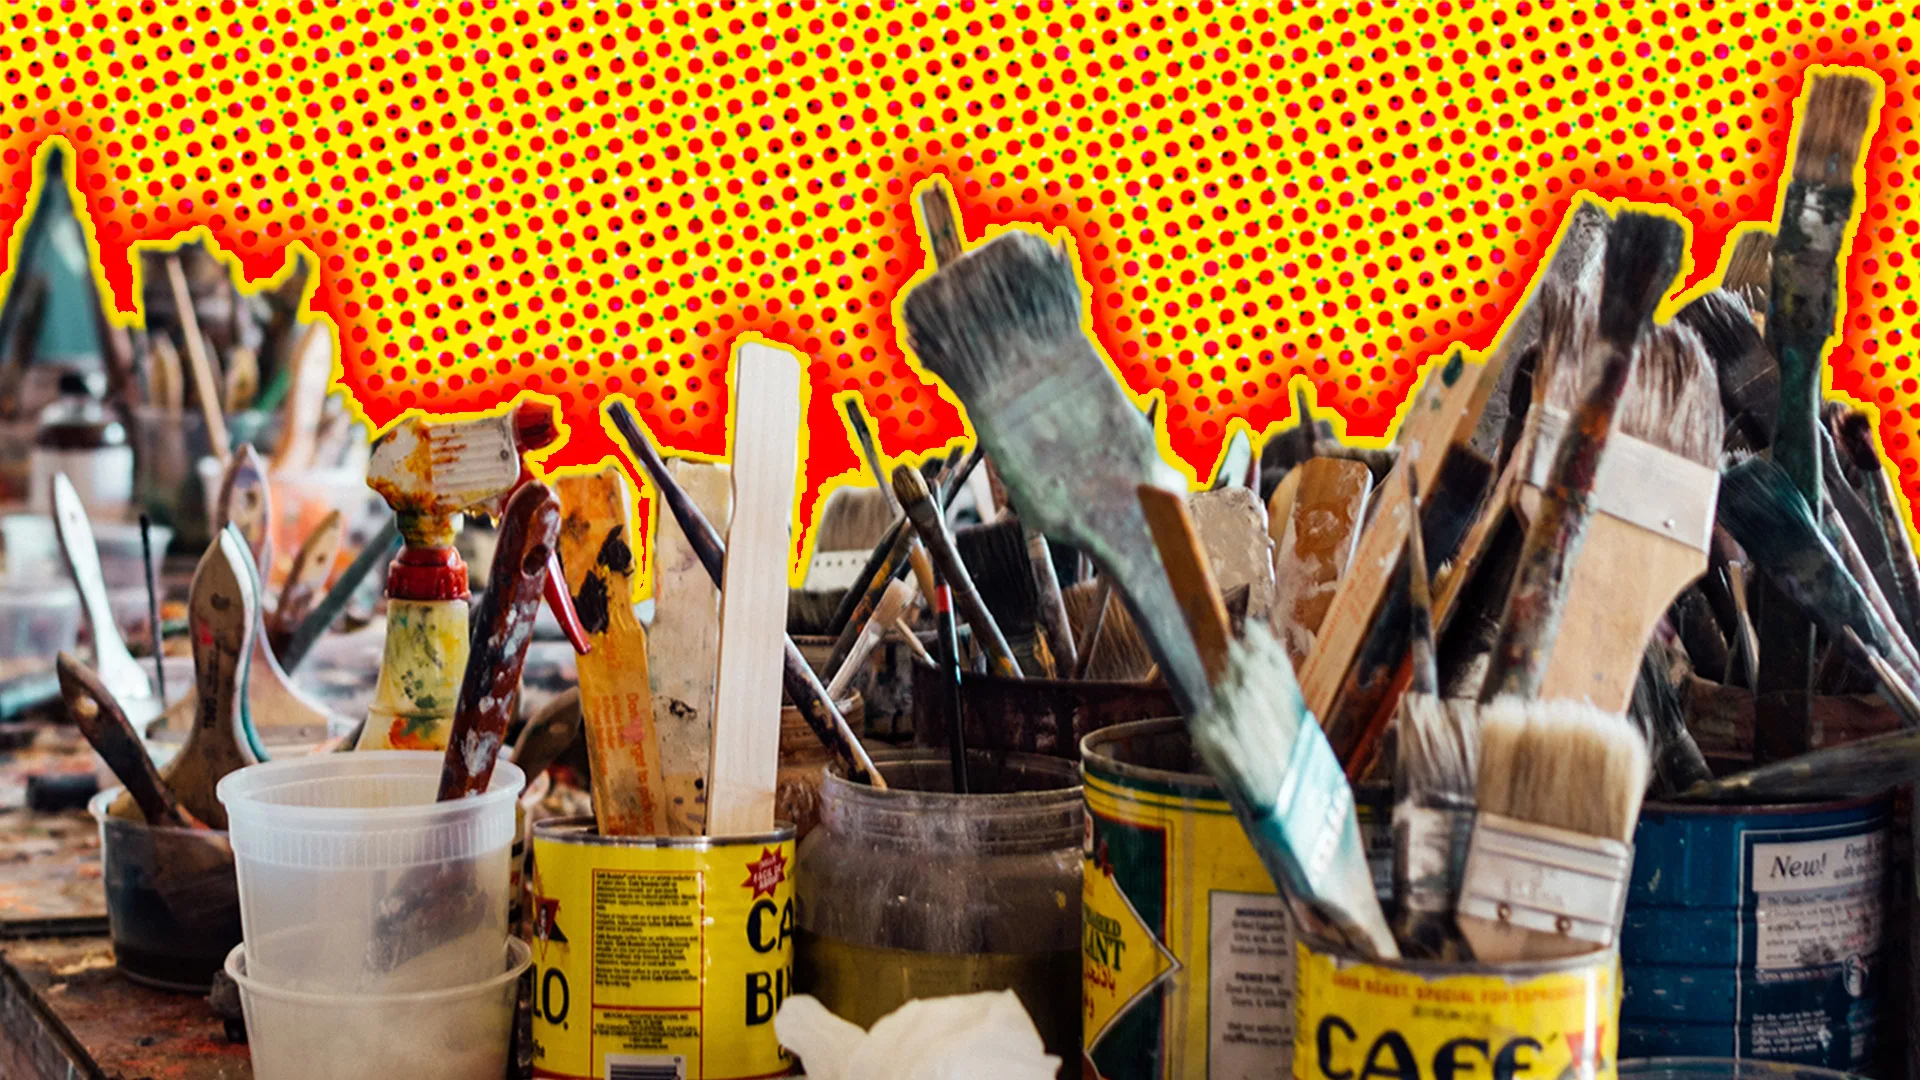 Artists paintbrushes with a polkadot background and a glow around the image